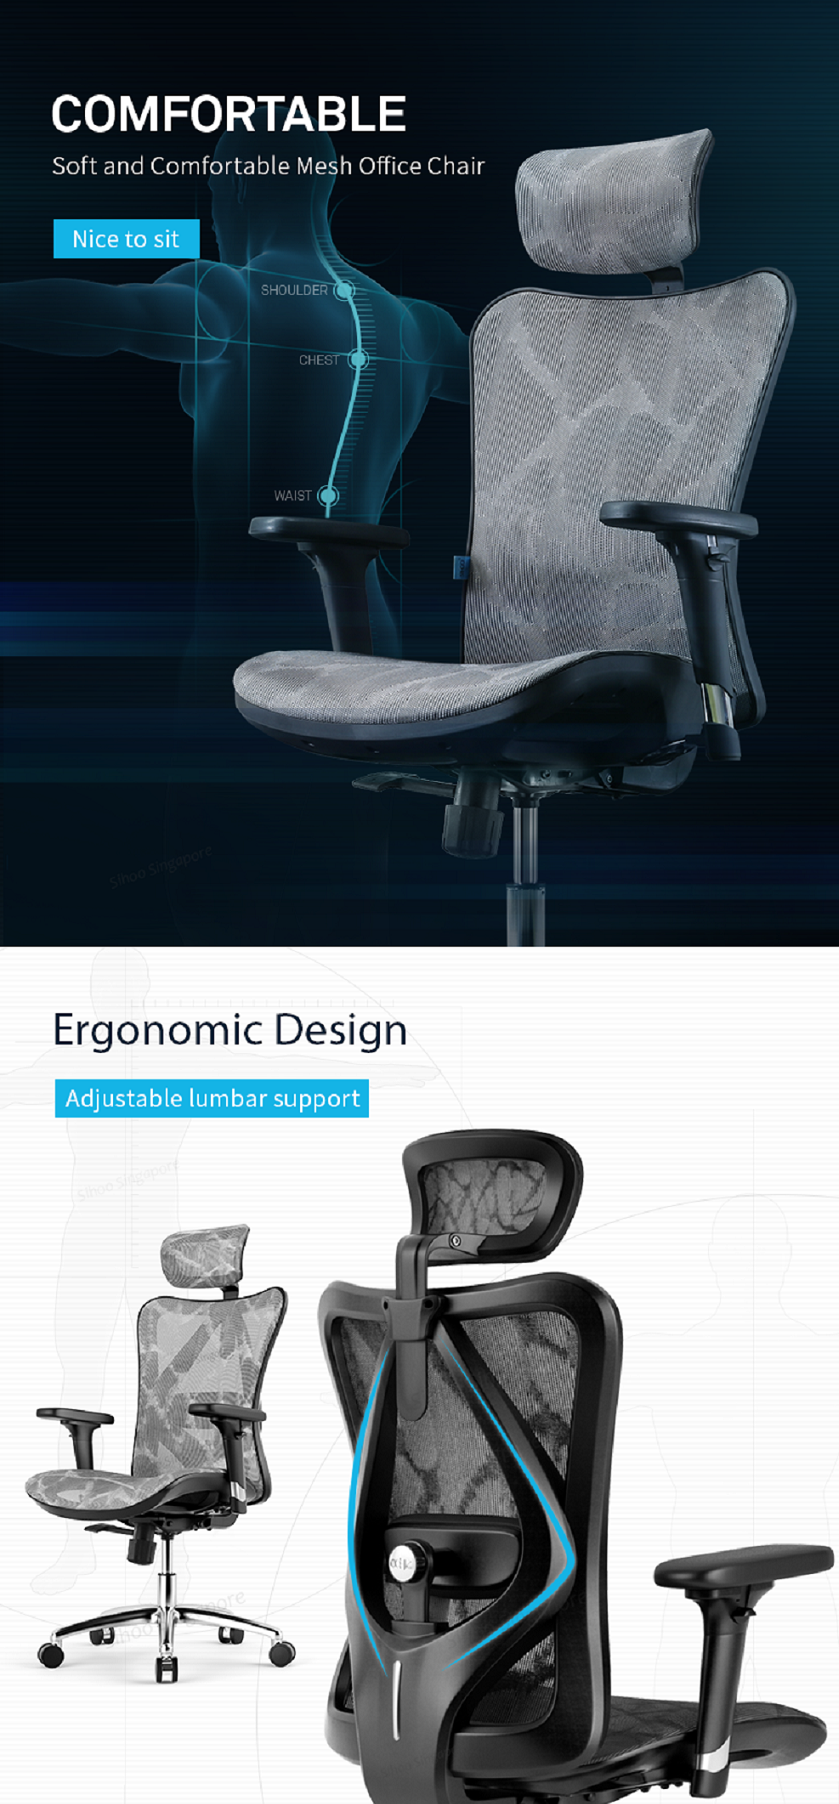 Sihoo M57 Ergonomic Office Chair Review: Comfort, Support, and